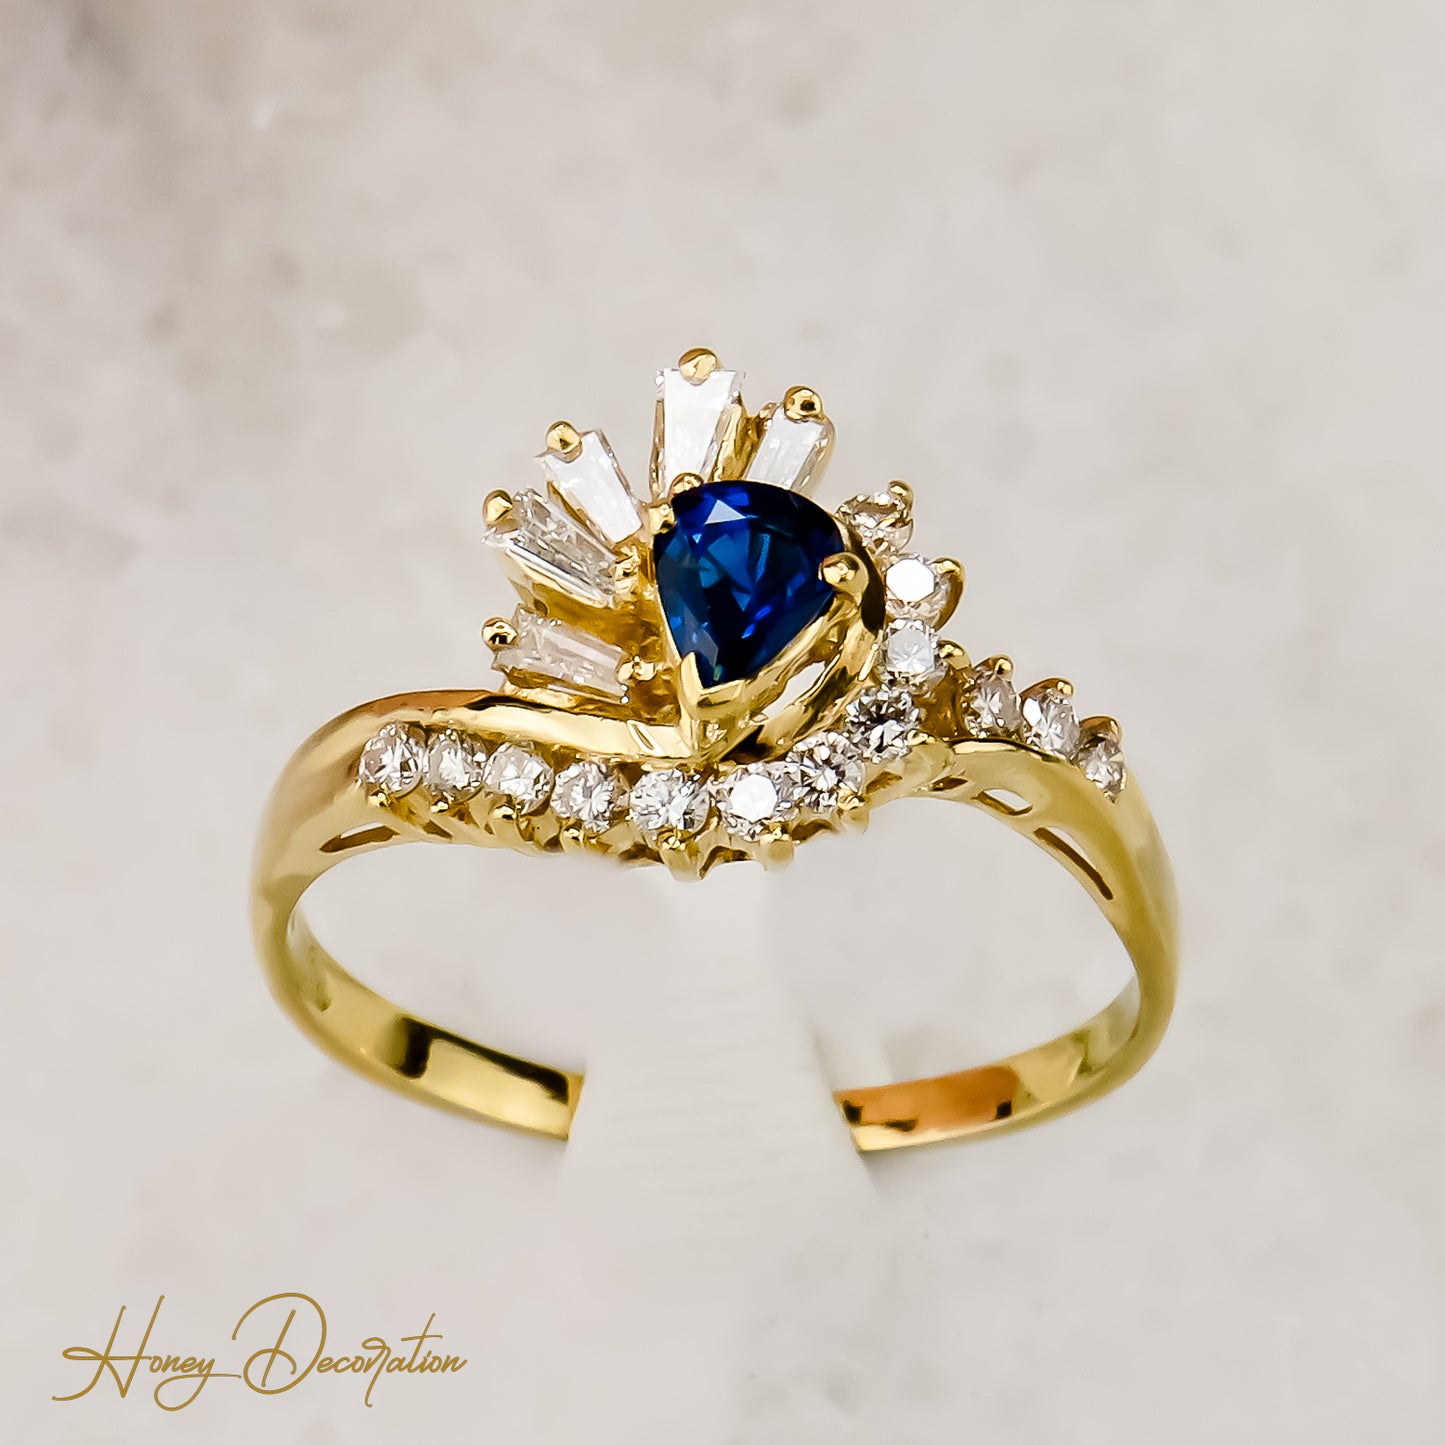 Fine gold ring with sapphire & diamonds